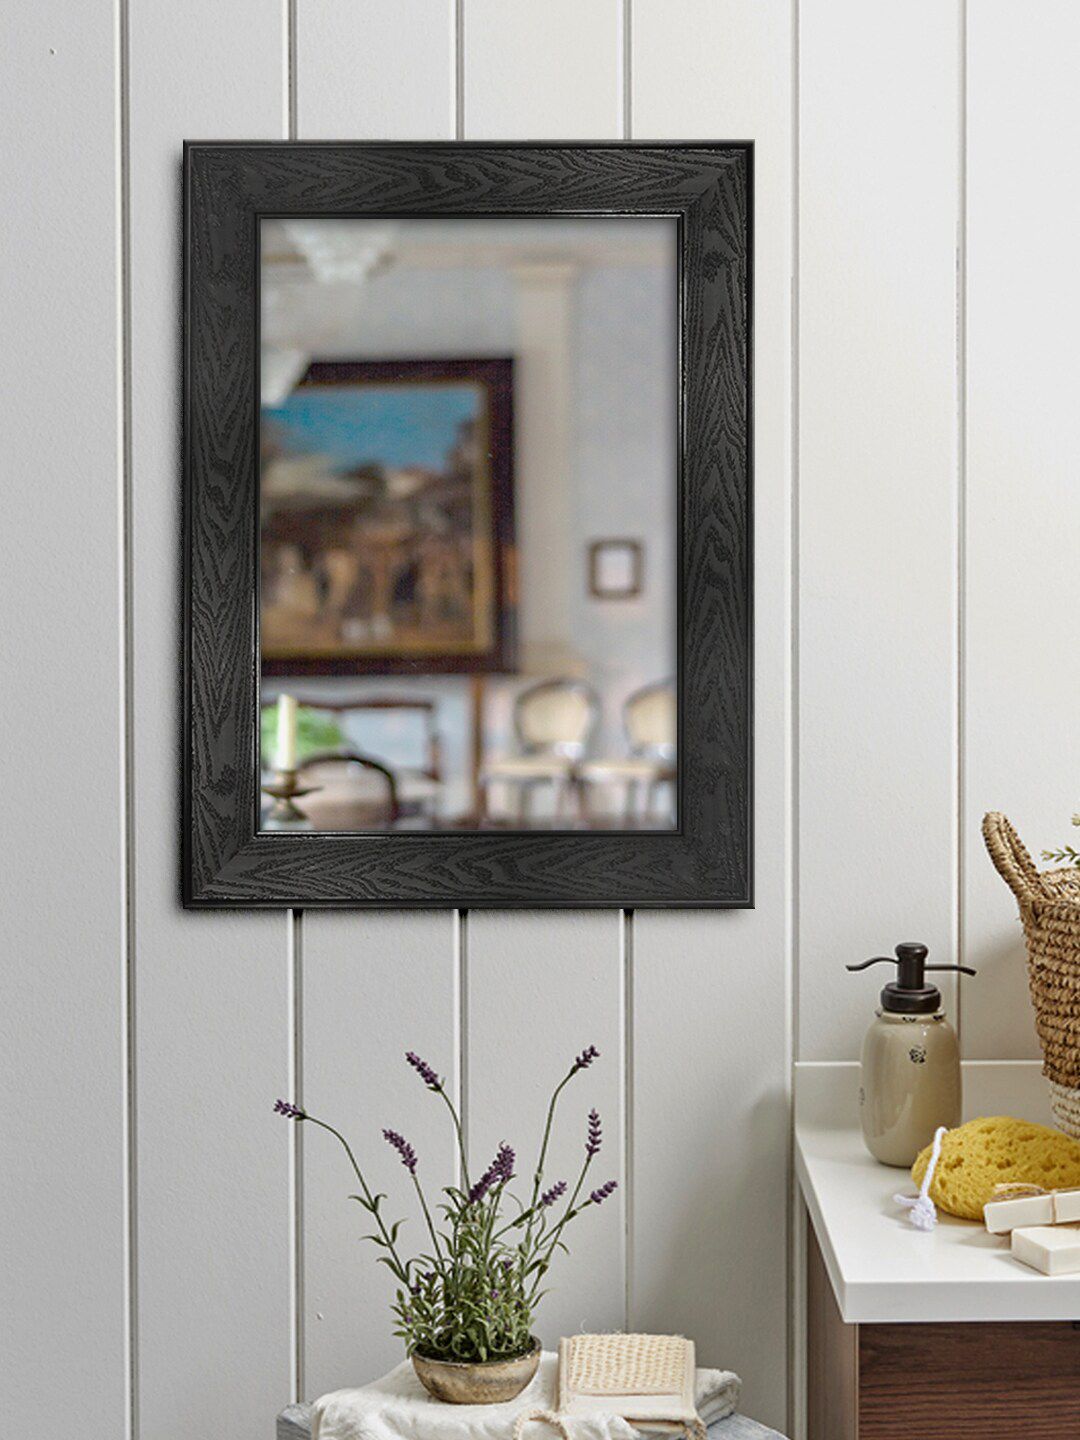 999Store Black Solid Framed Wall Mirror Price in India